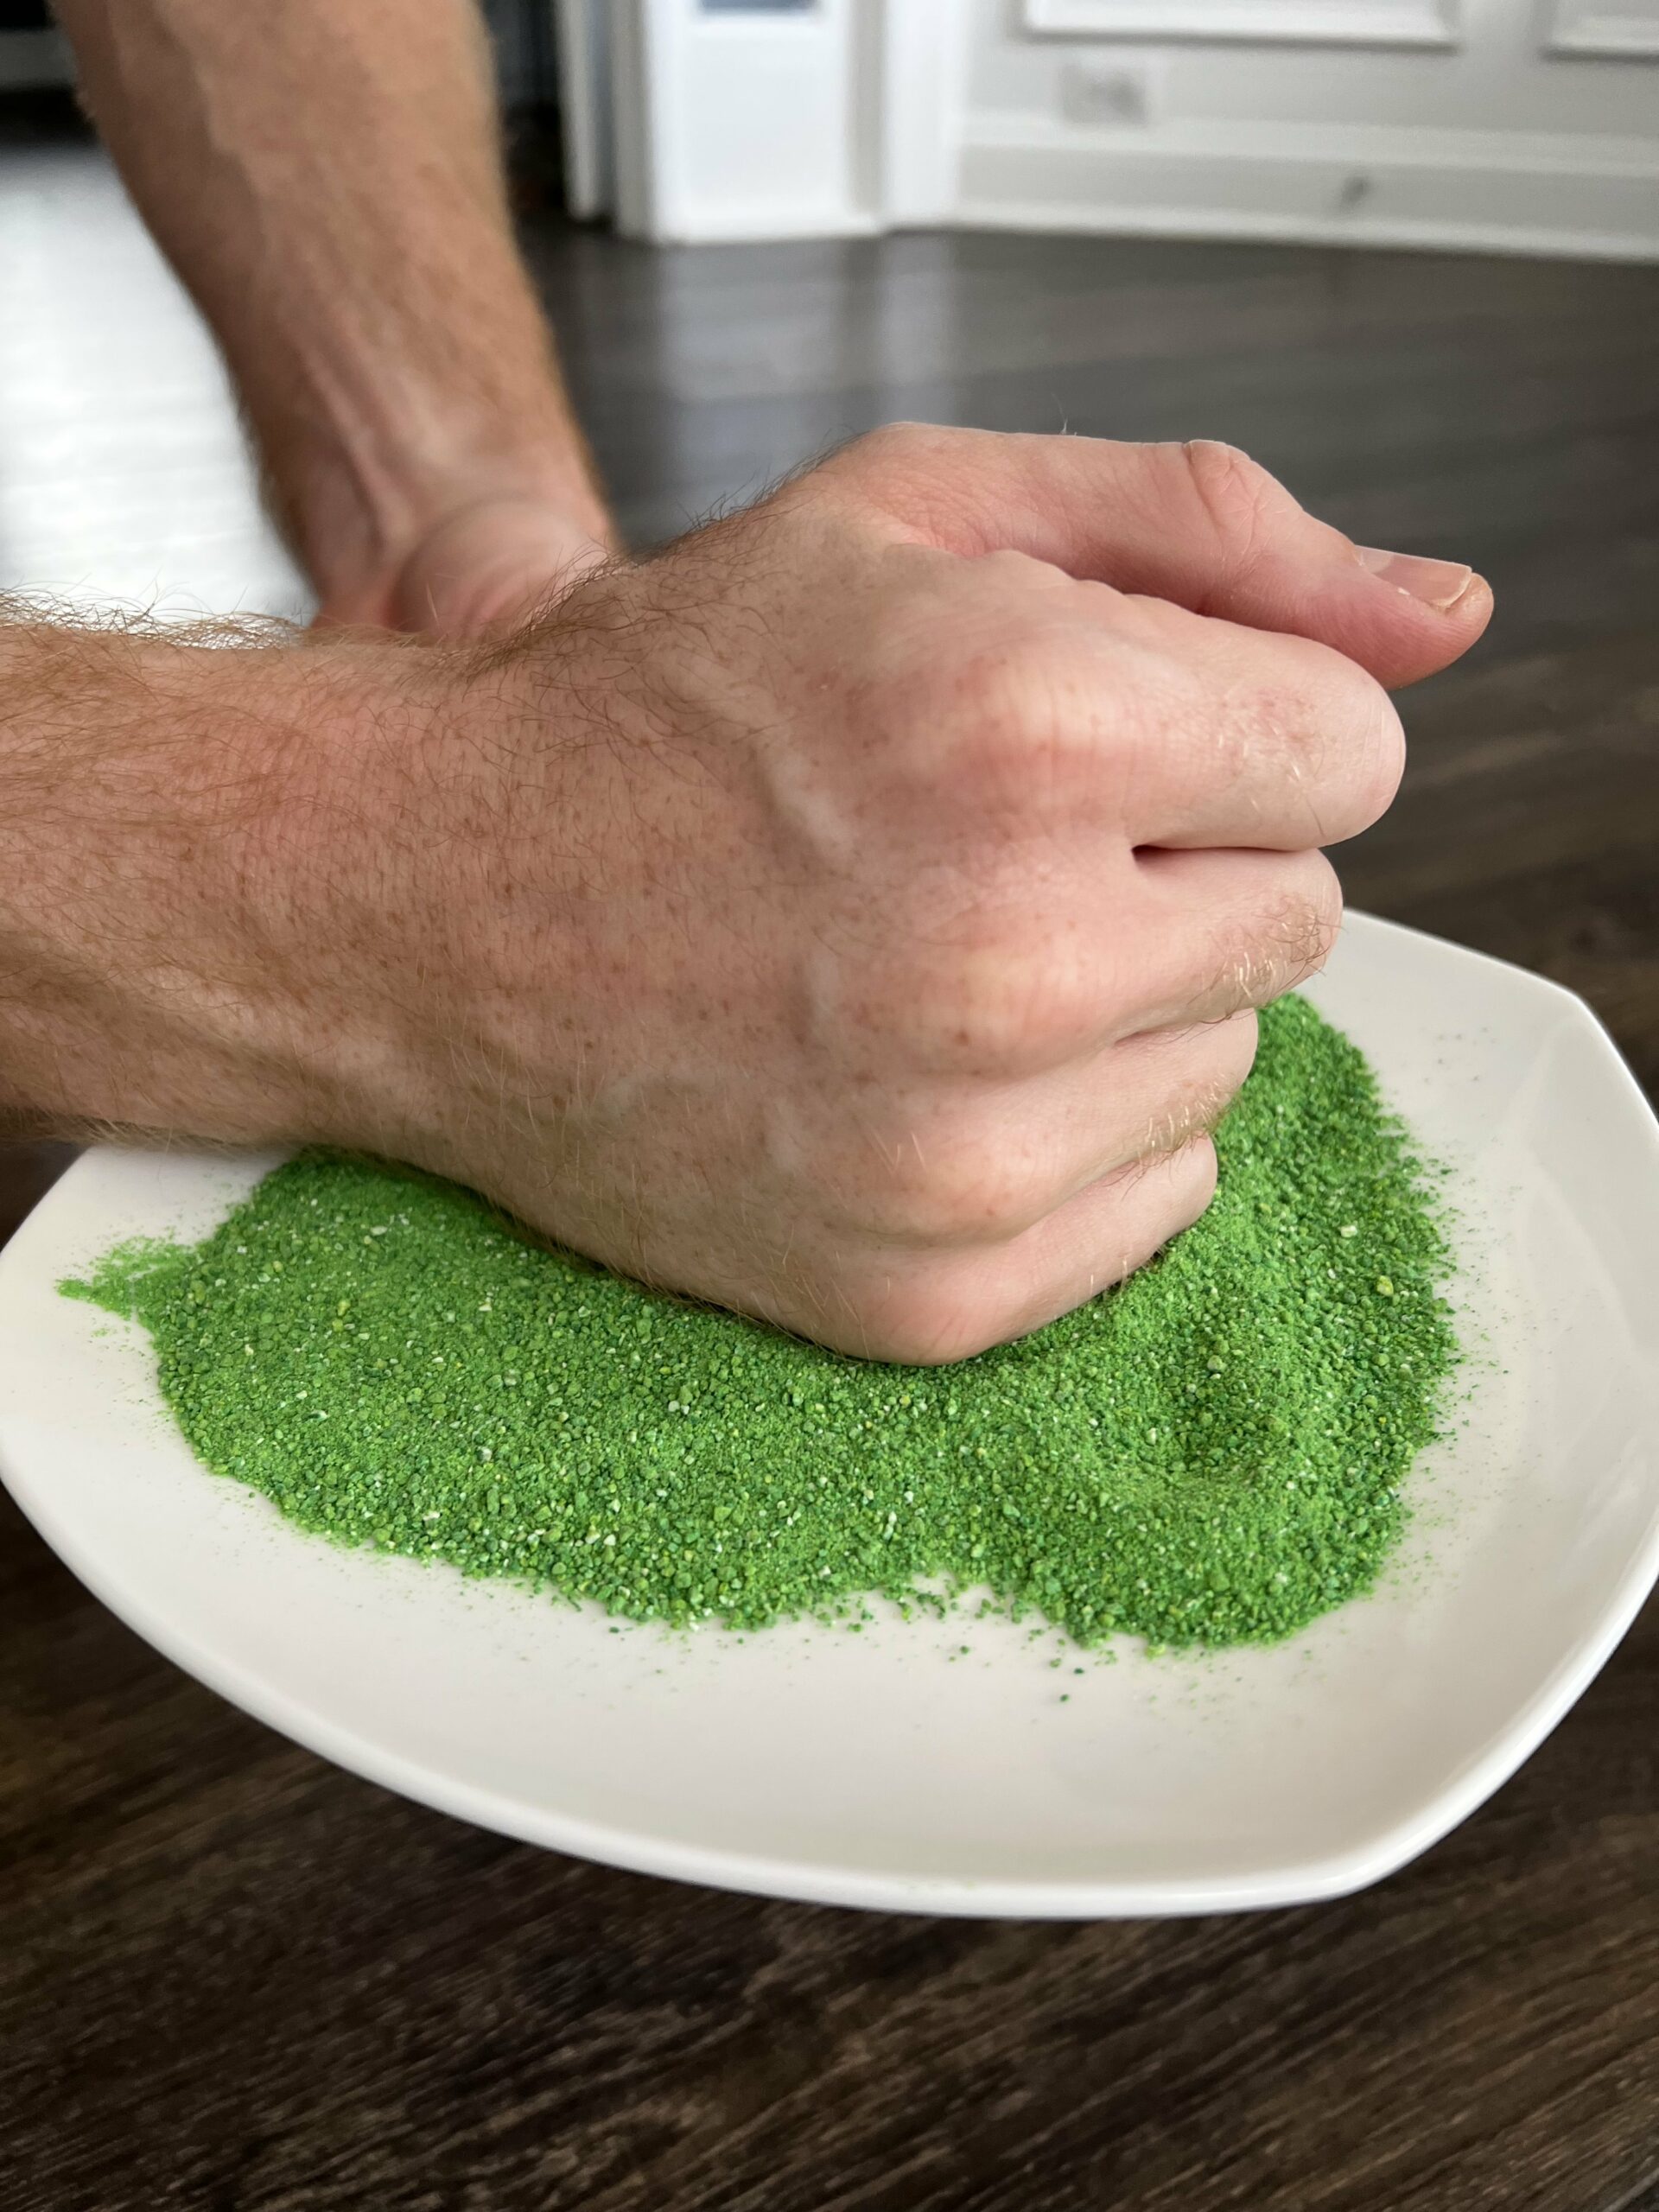 dipping fist in green powder